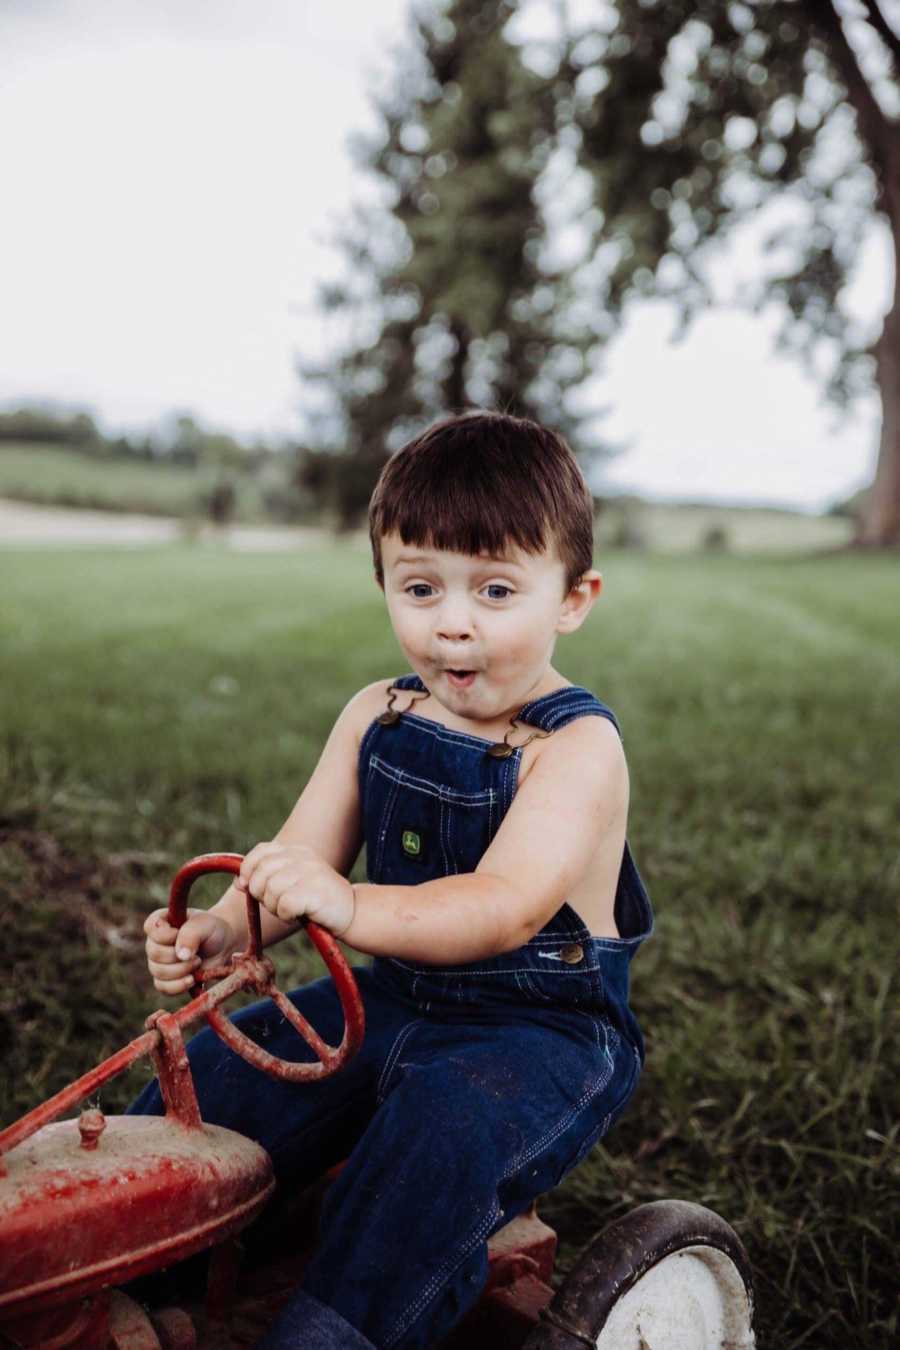 Little boy makes funny face while sitting on toy red tractor